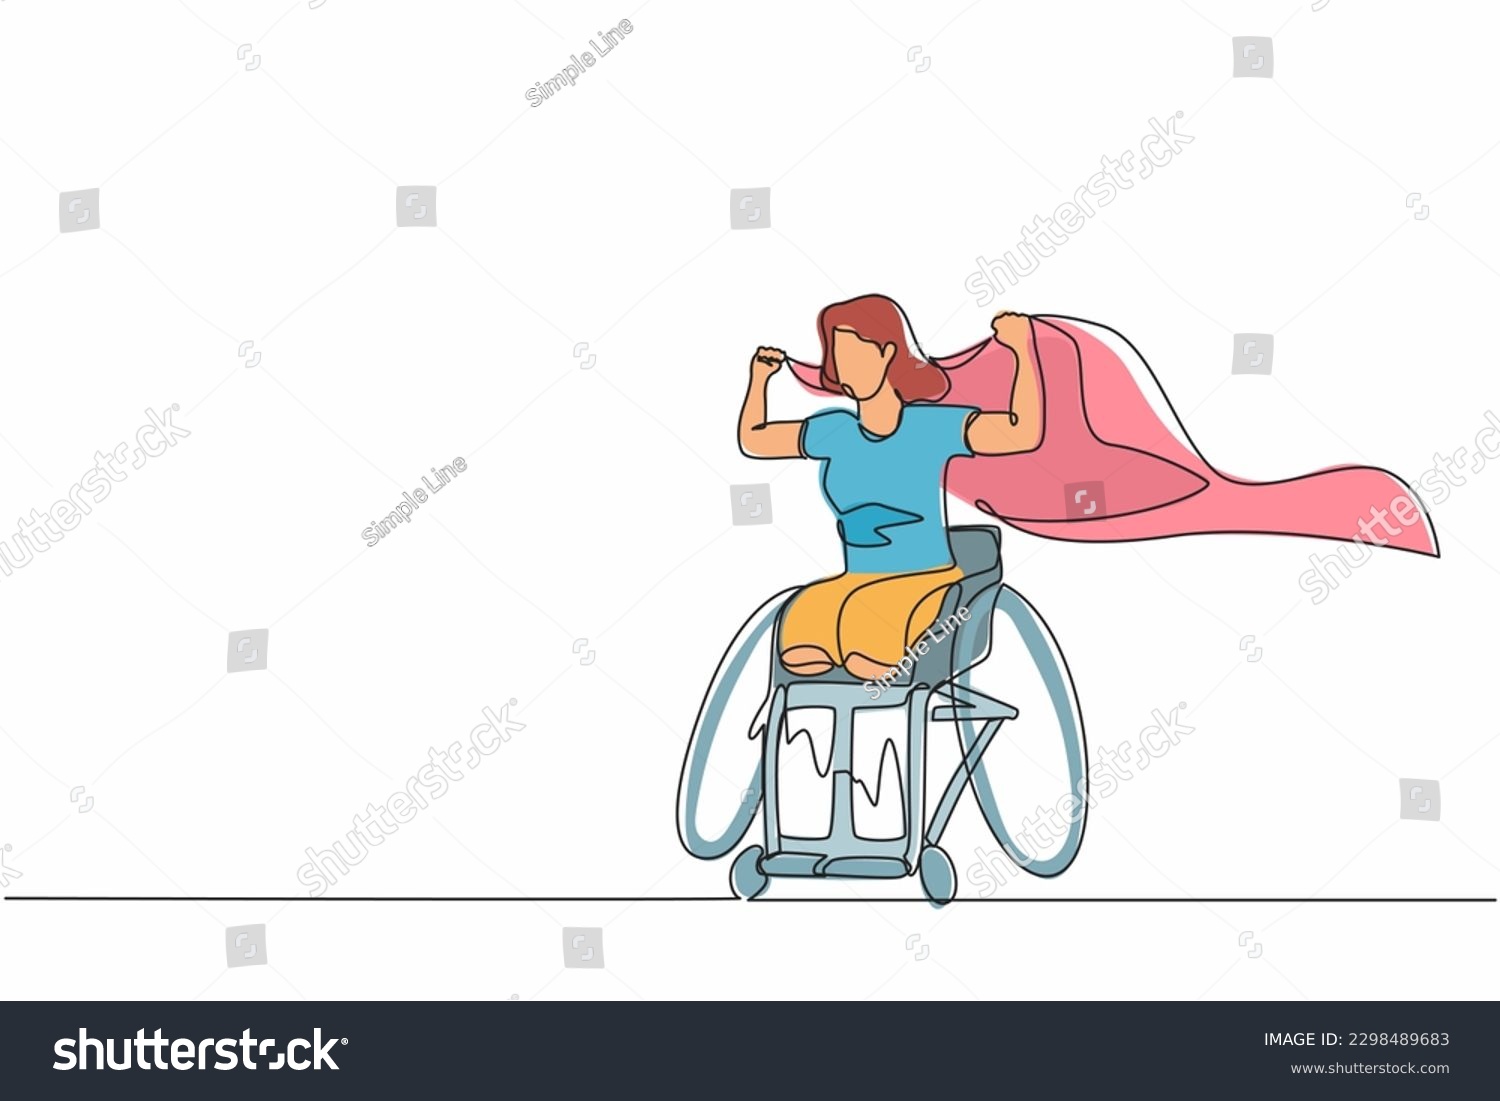 SVG of Single one line drawing young amputee woman with body injuries raising flag. Disabled athlete sitting on racing wheelchair, disabled sportswoman. Continuous line design graphic vector illustration svg